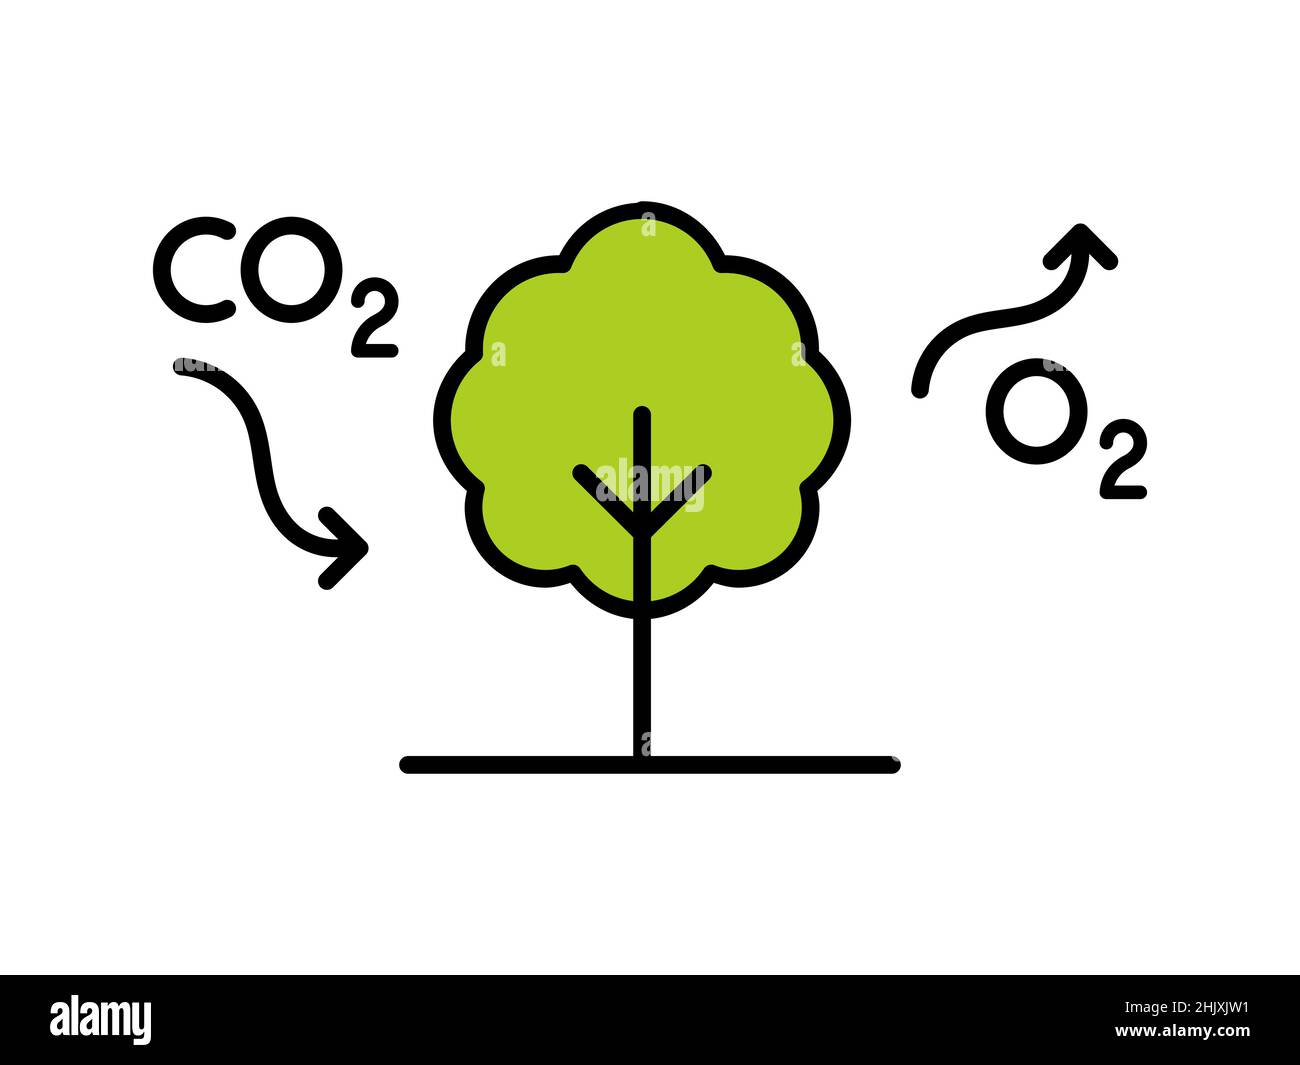 Co2 cycle oxygen cycle Stock Vector Images - Alamy